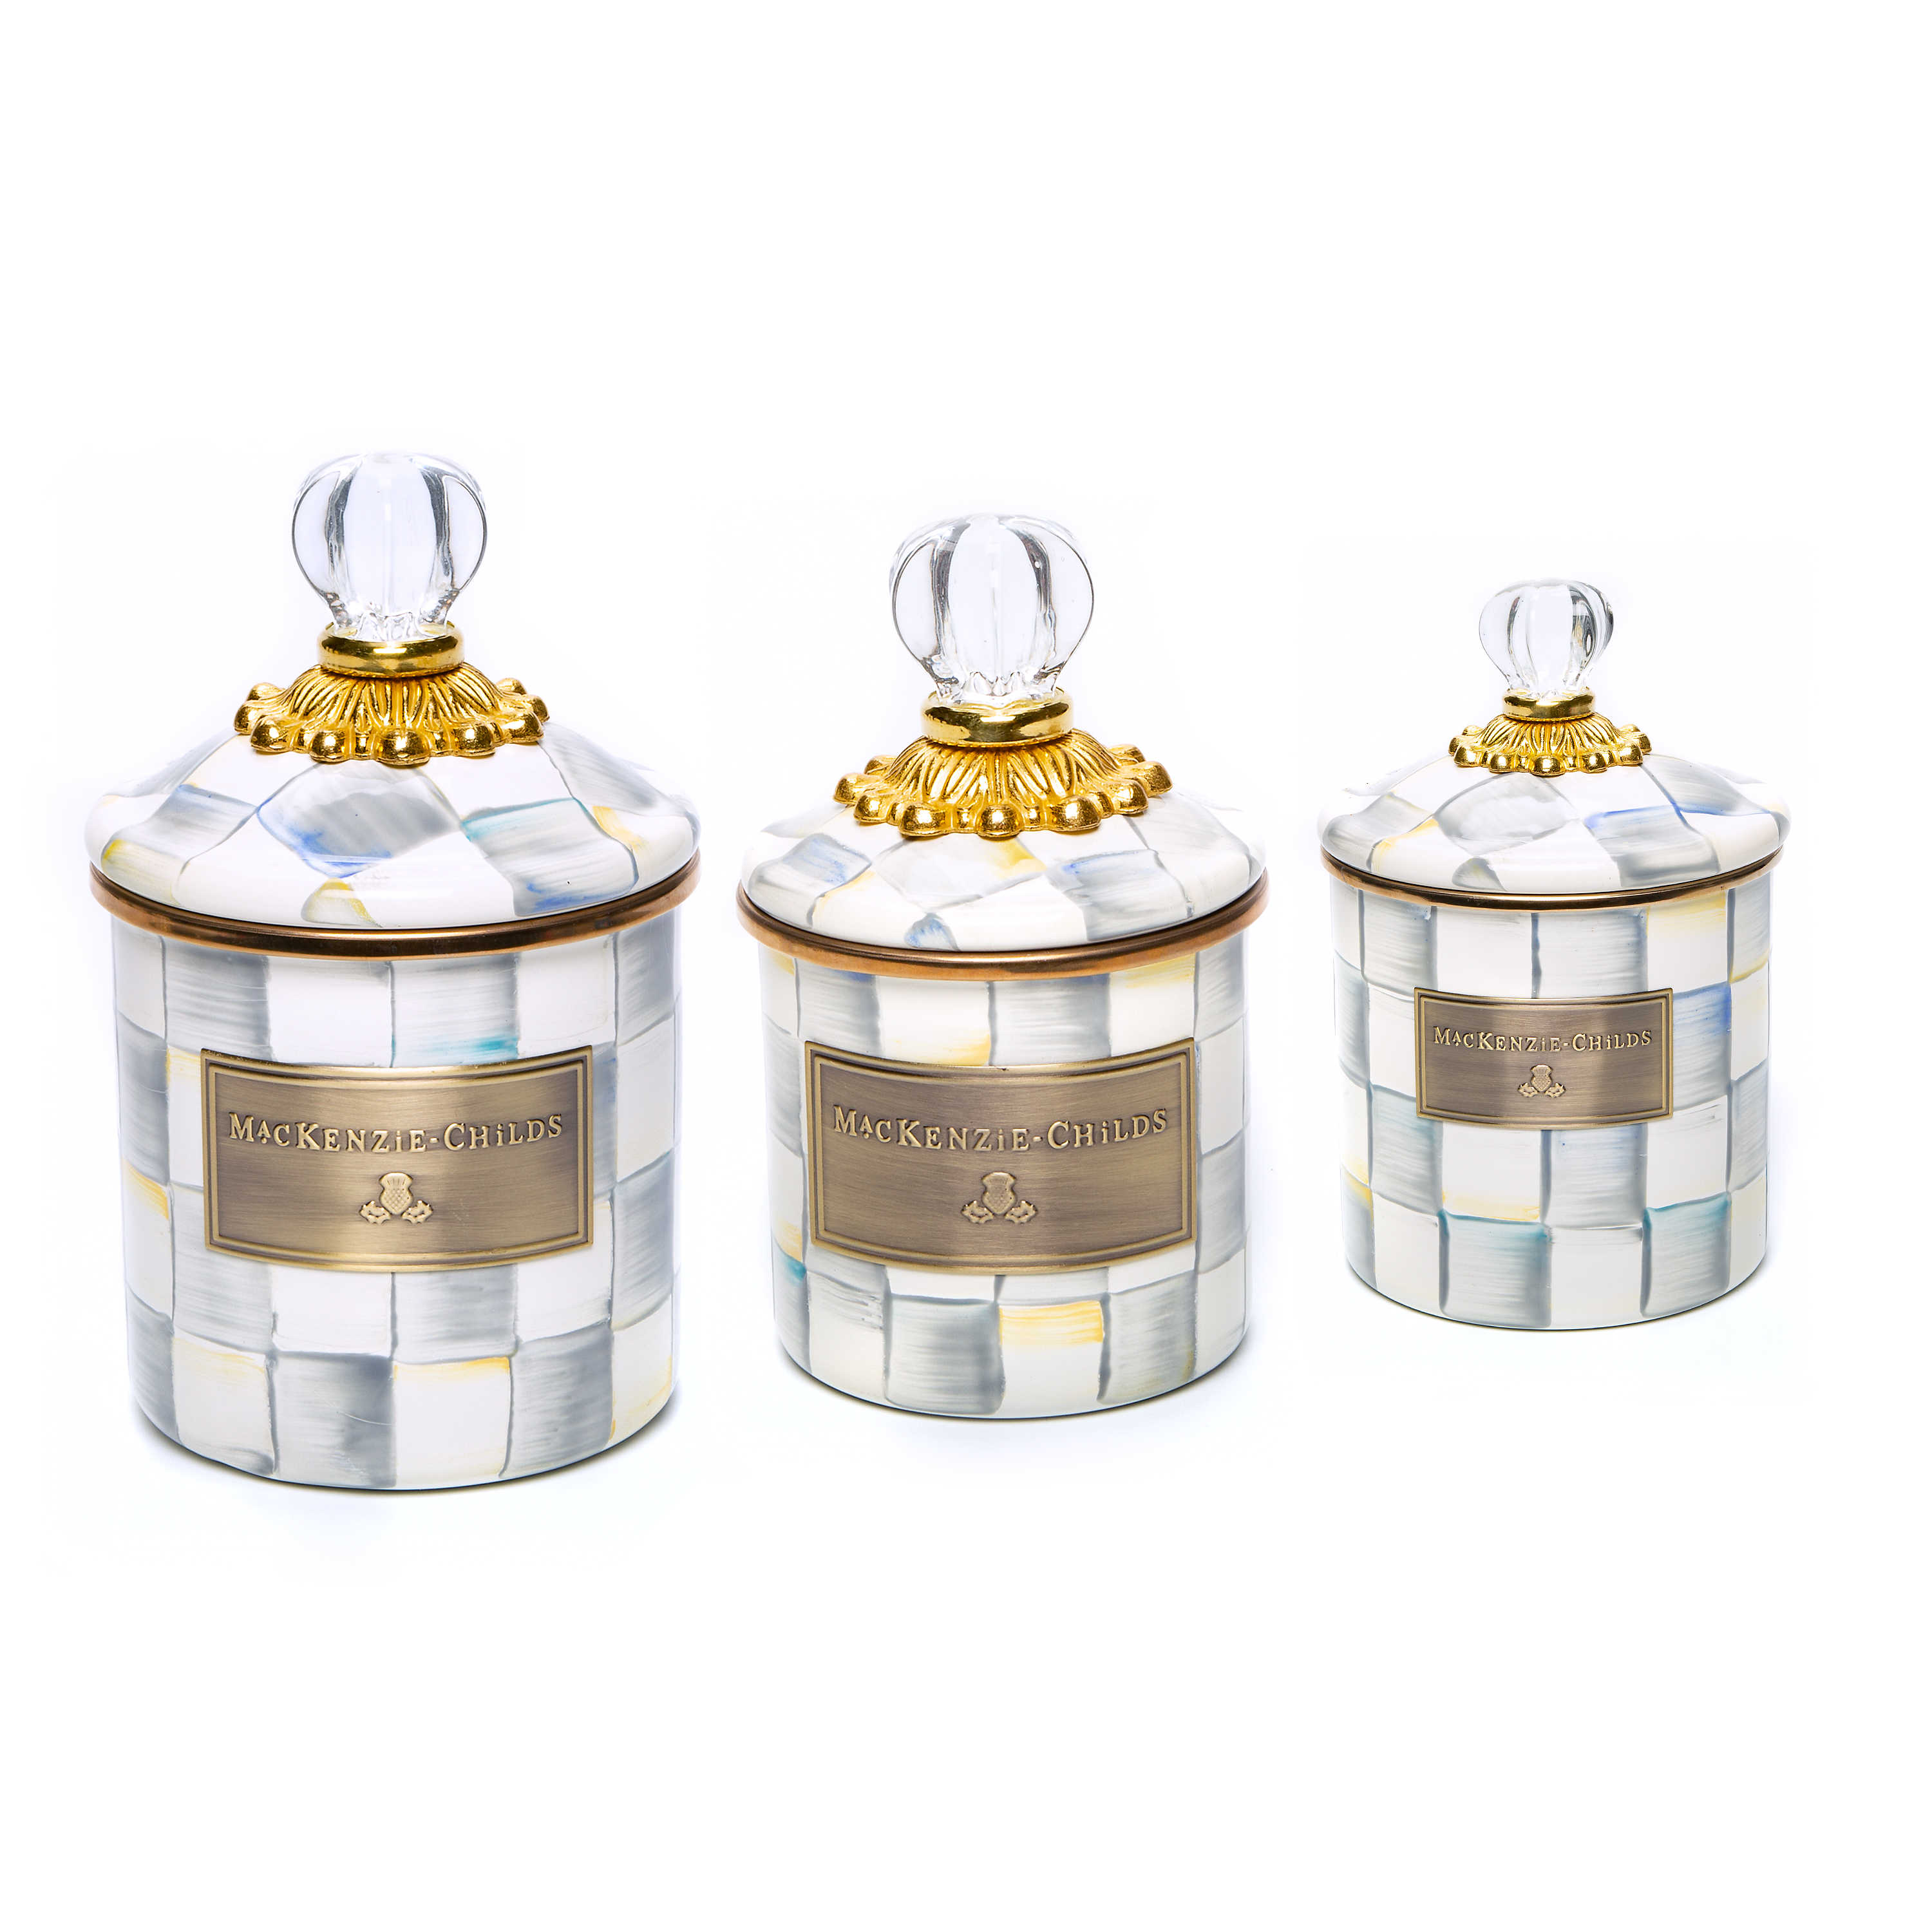 Sterling Check Little Canisters, Set of 3 mackenzie-childs Panama 0